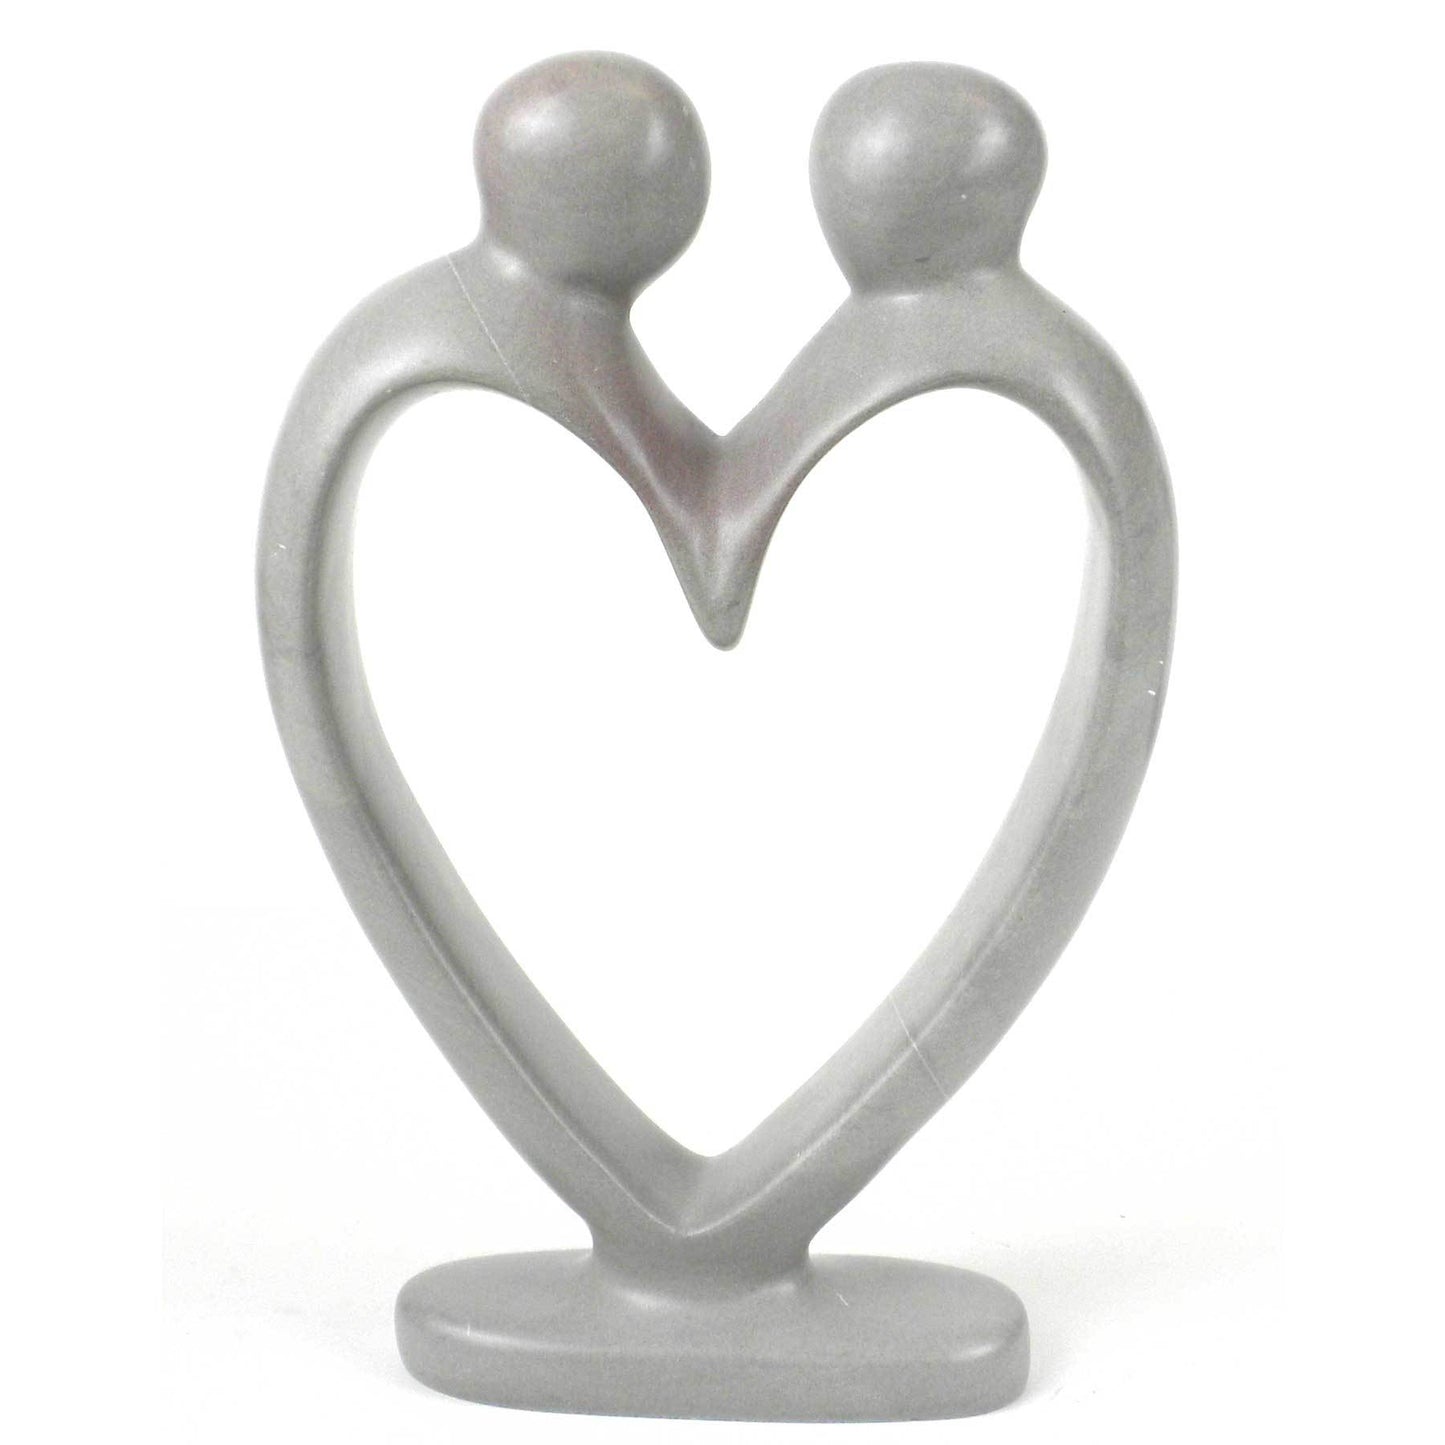 Natural Soapstone Lover's Heart, 8" - Linda Kay Gifford’s - Those Nasty Women TALK! by SWEETSurvivor